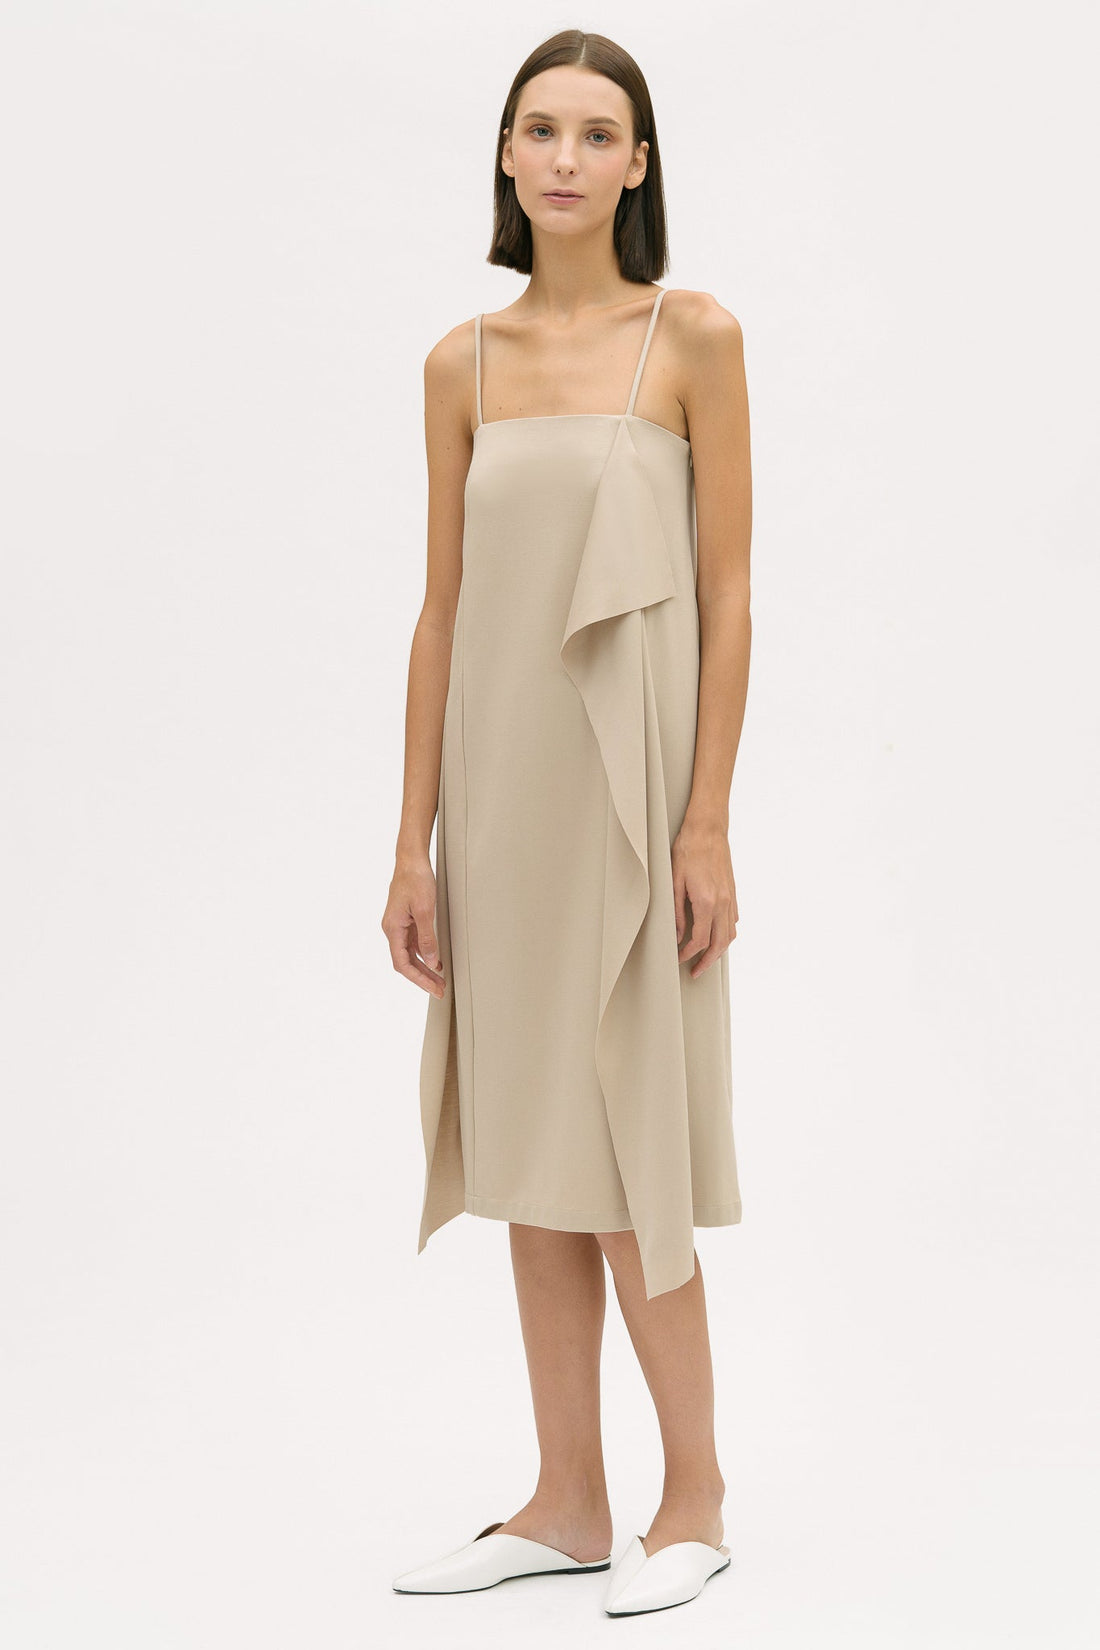 A woman is wearing a beige slip dress with ruffles. She also has white leather shoes on.